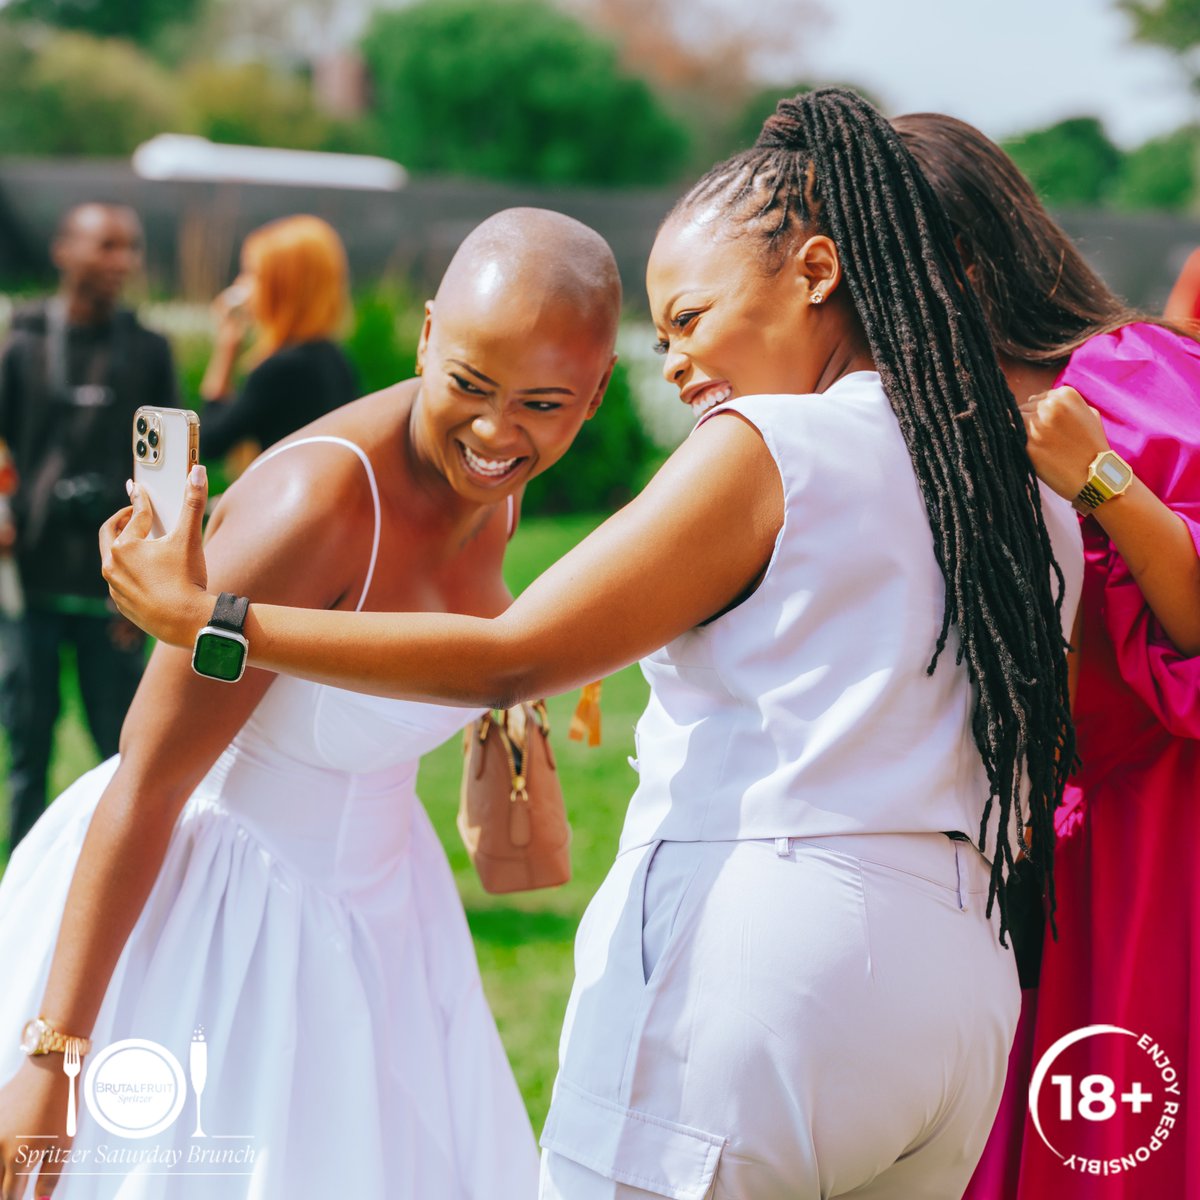 We see the blissful moment every bestie has shared with us. 💝 ​ ​If you could add a snap to our brunch album, what would it be? Share with us below and we might send a sparkling surprise in your DM's. #SpritzerSaturdayBrunch #CelebrateTheMoment